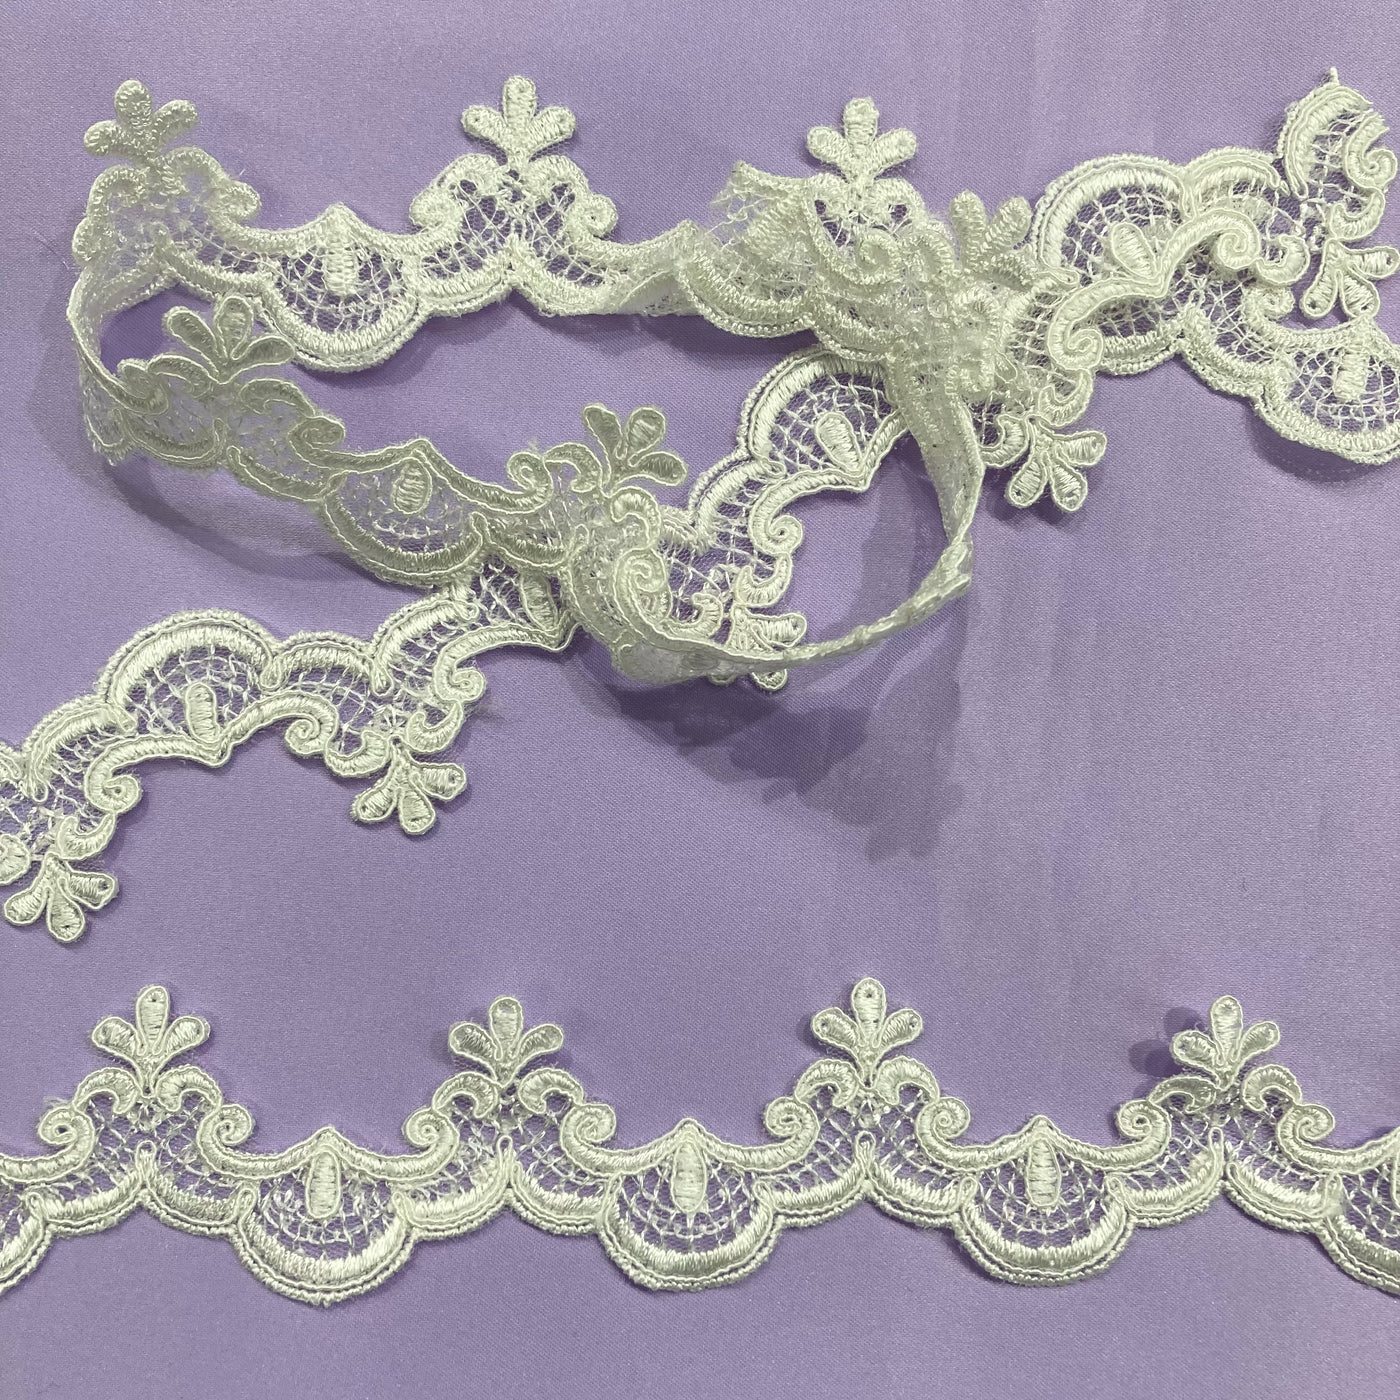 Corded Ivory Lace Trimming Embroidered on 100% Polyester Net Mesh. Lace USA